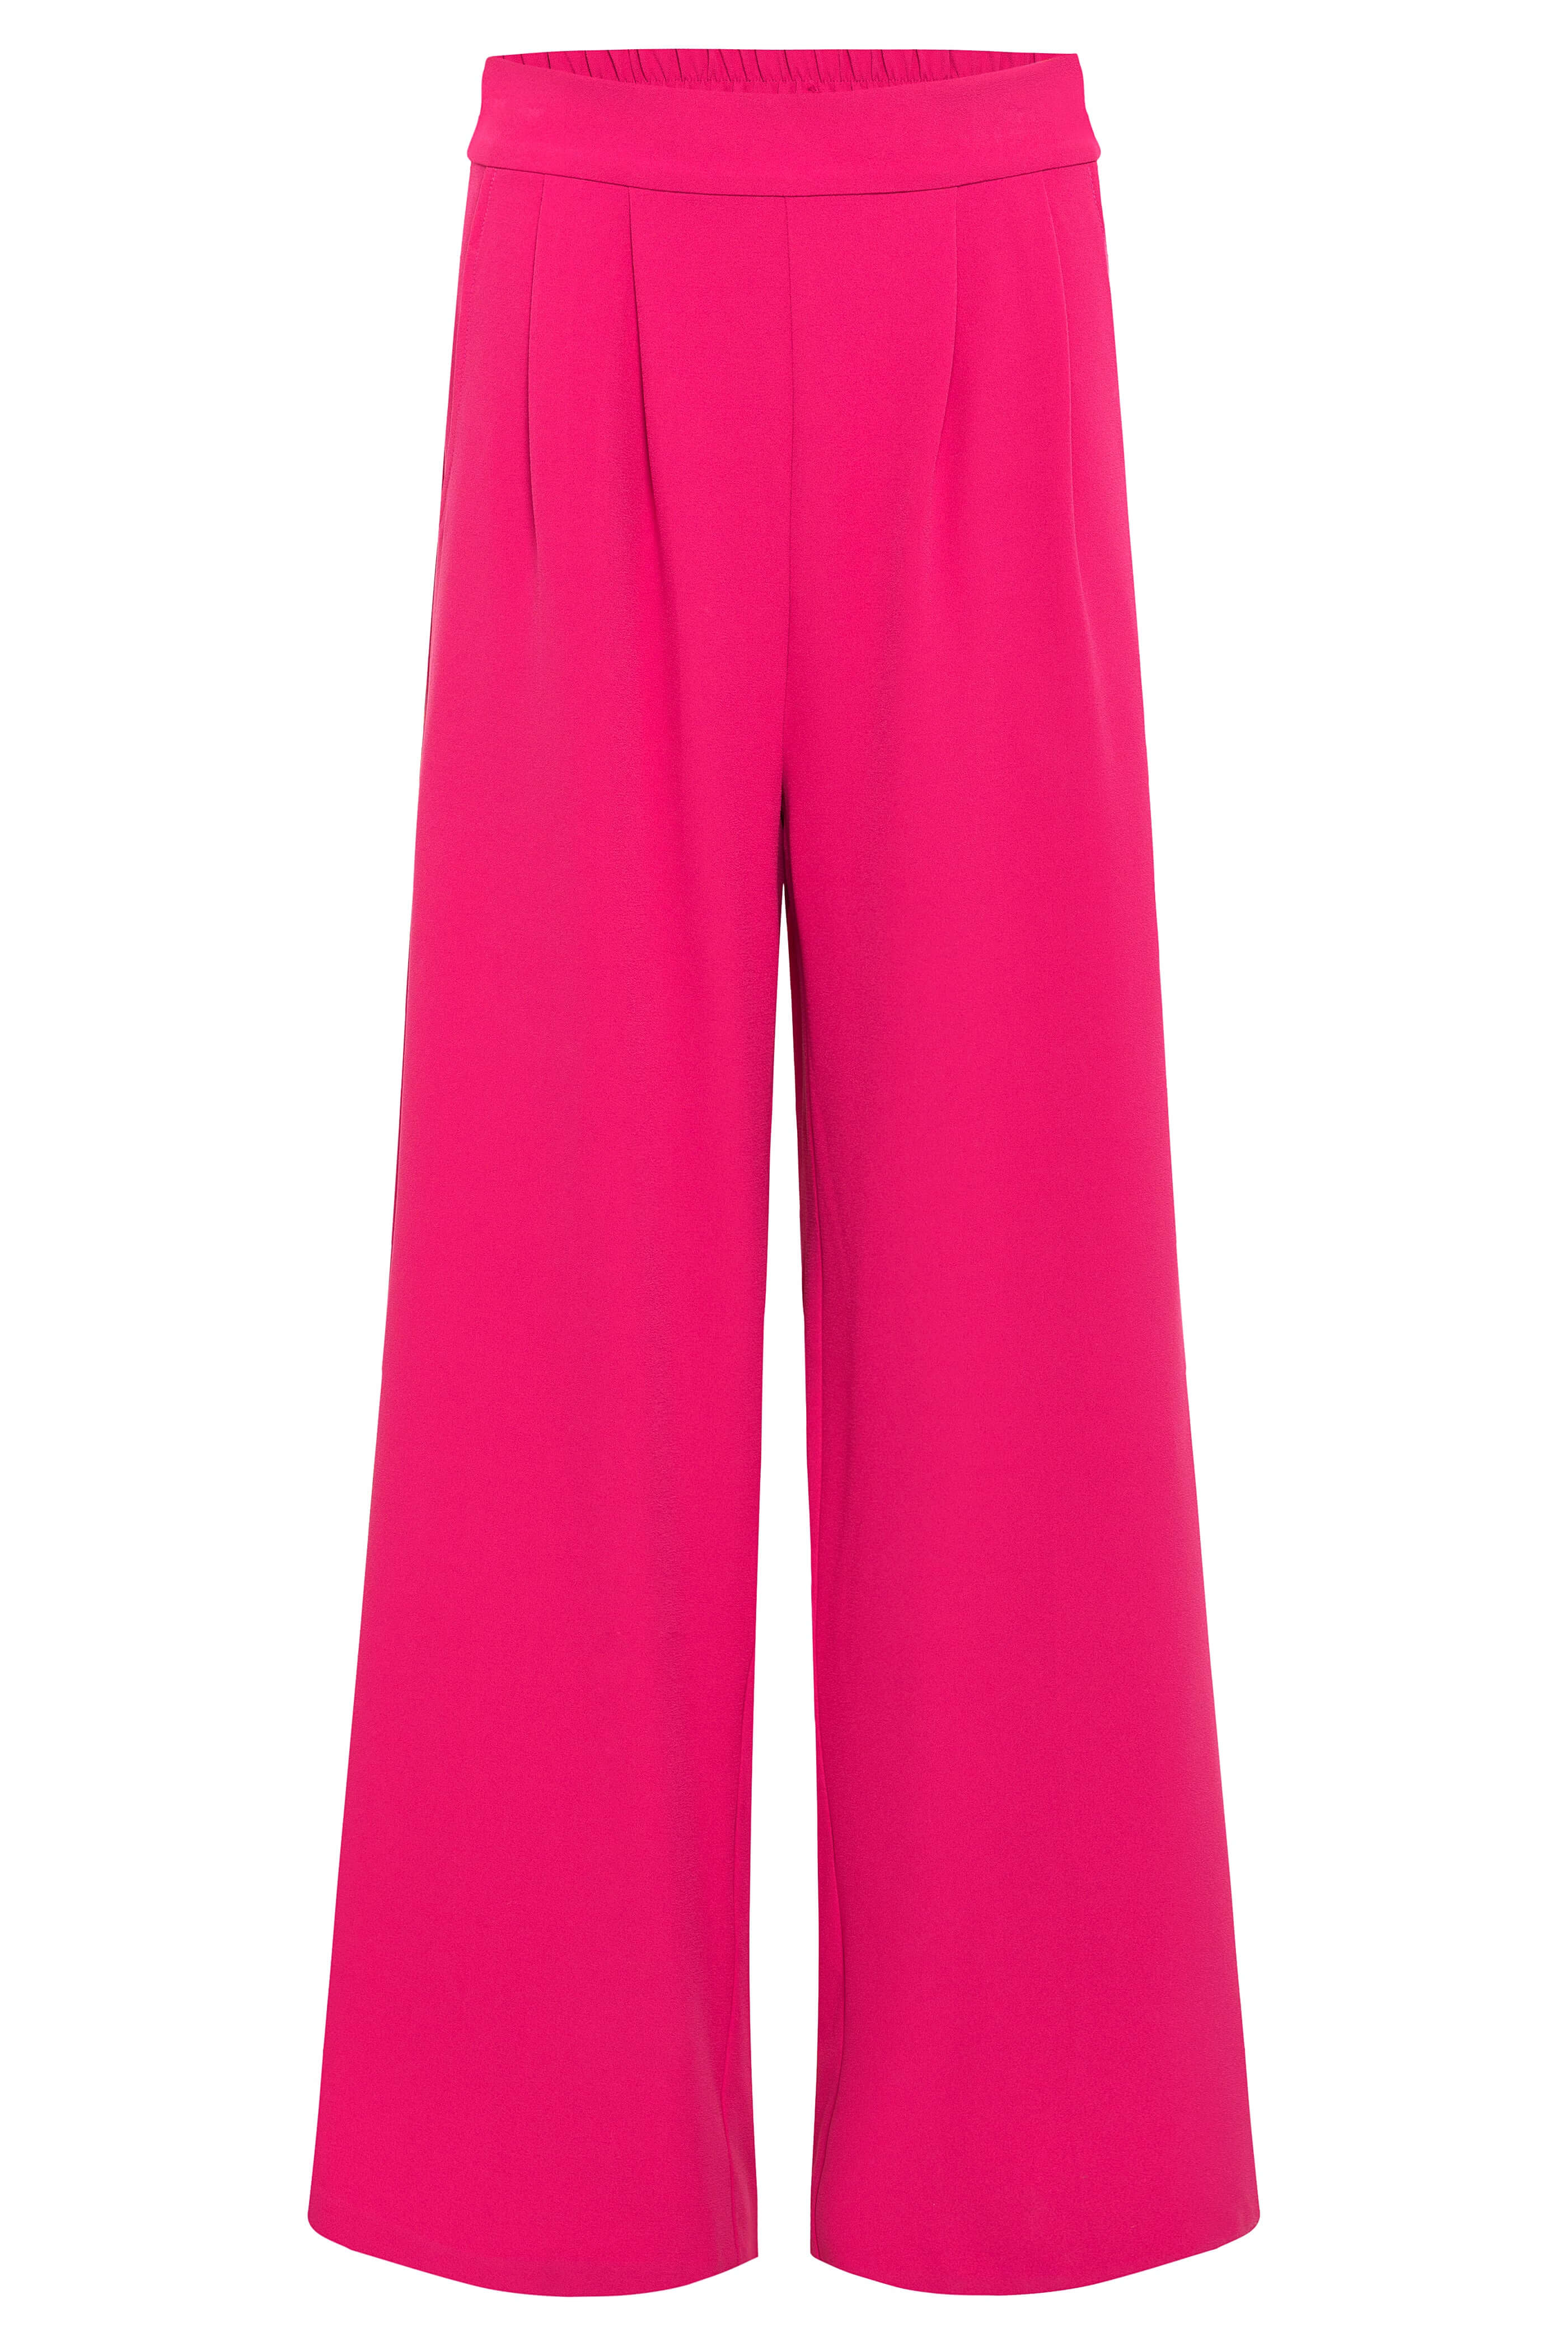 Sai Wide Leg Pants (Solid Pink) front view 